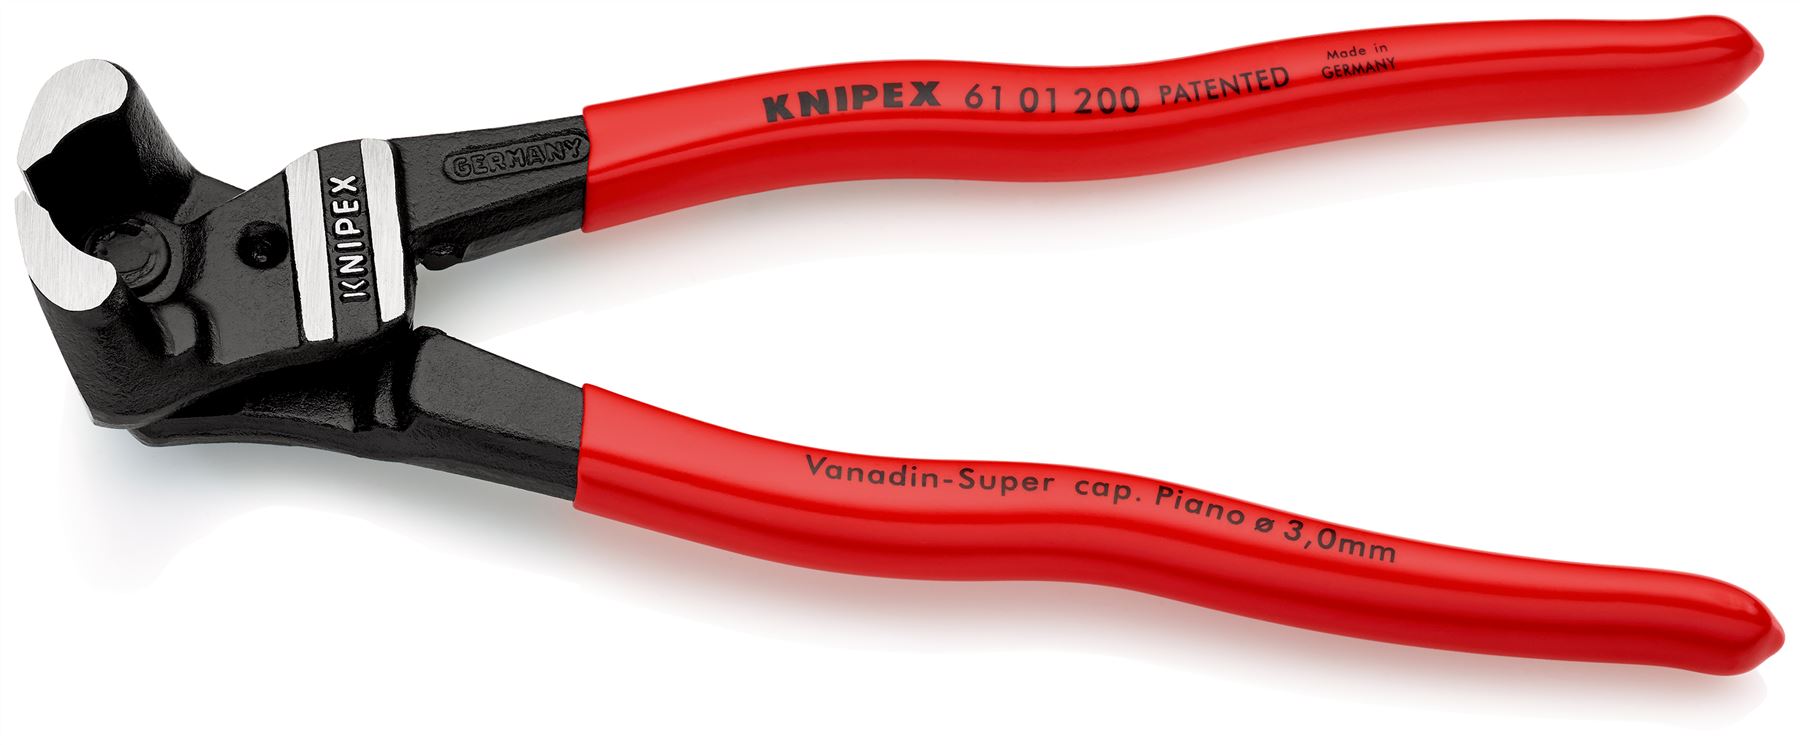 KNIPEX Bolt End Cutting Nipper Pliers High Lever Transmission 200mm Plastic Coated 61 01 200